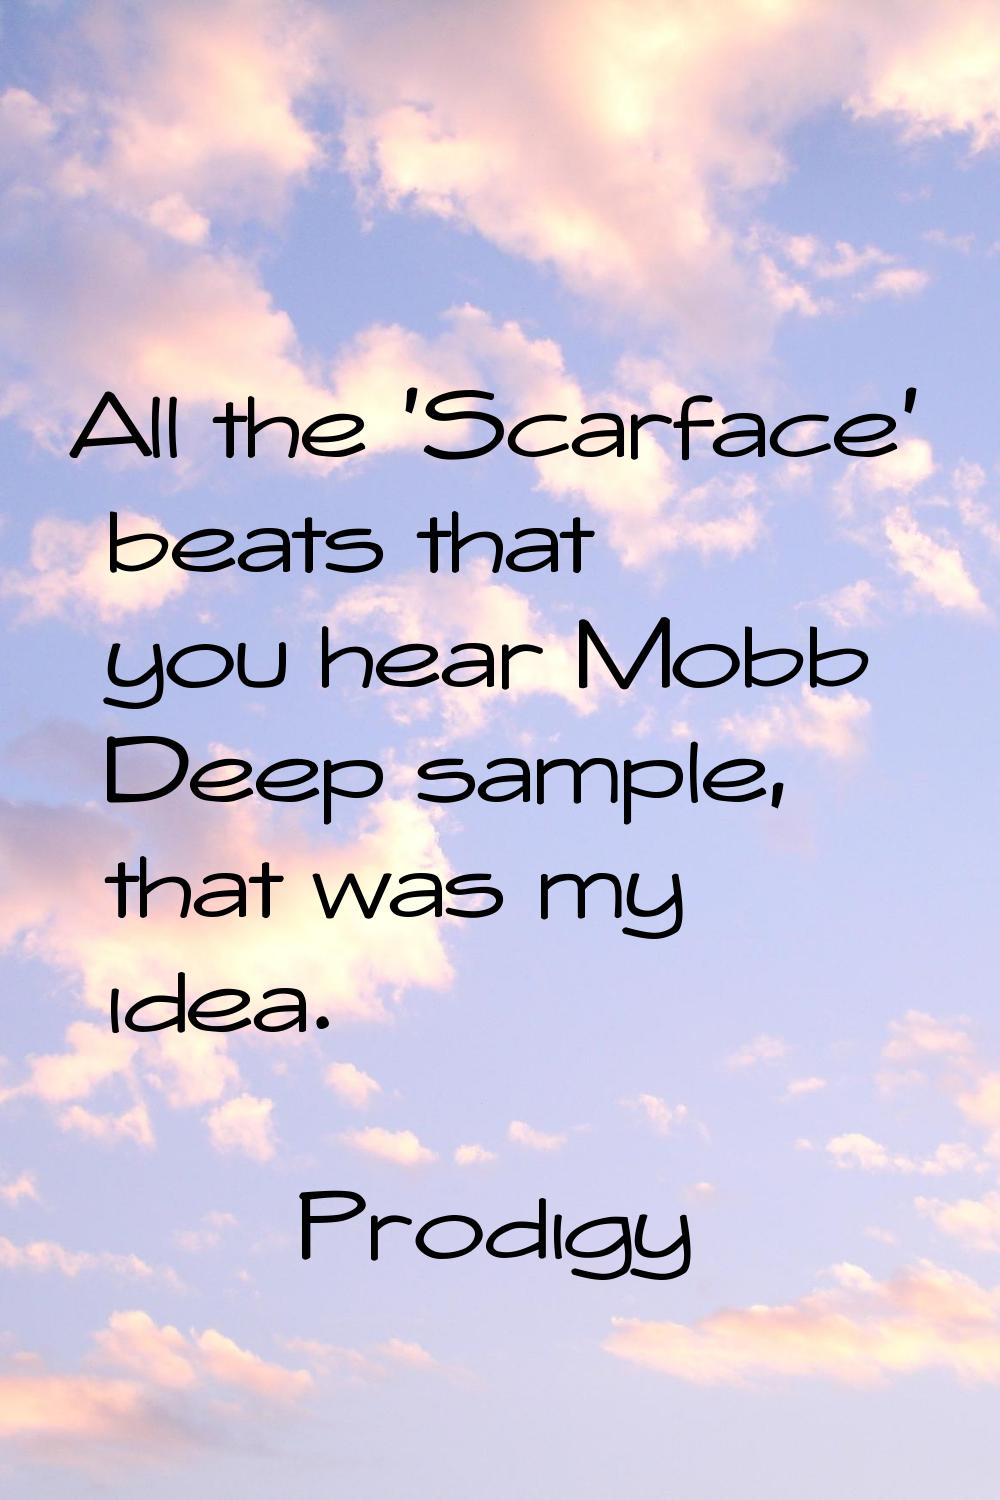 All the 'Scarface' beats that you hear Mobb Deep sample, that was my idea.